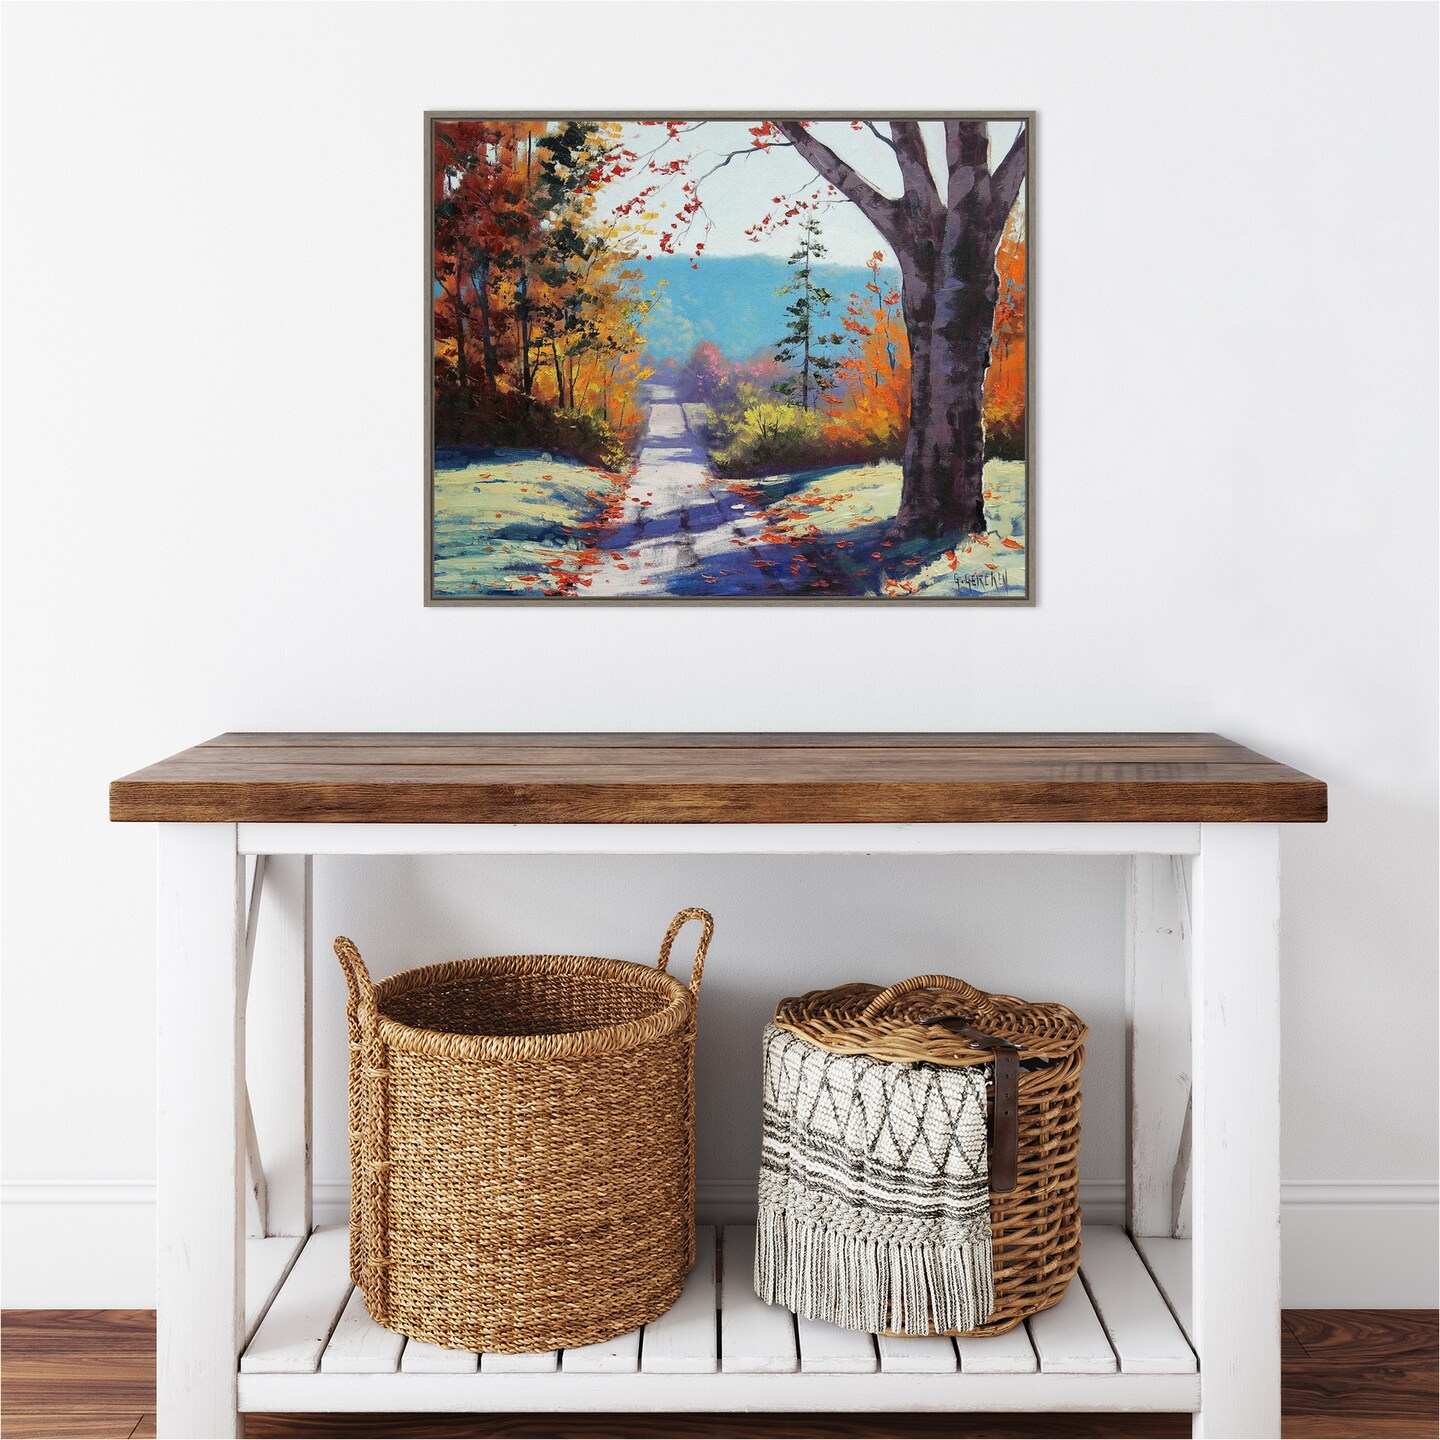 Autumn Delight by Graham Gercken 28-in. W x 23-in. H. Canvas Wall Art Print Framed in Grey